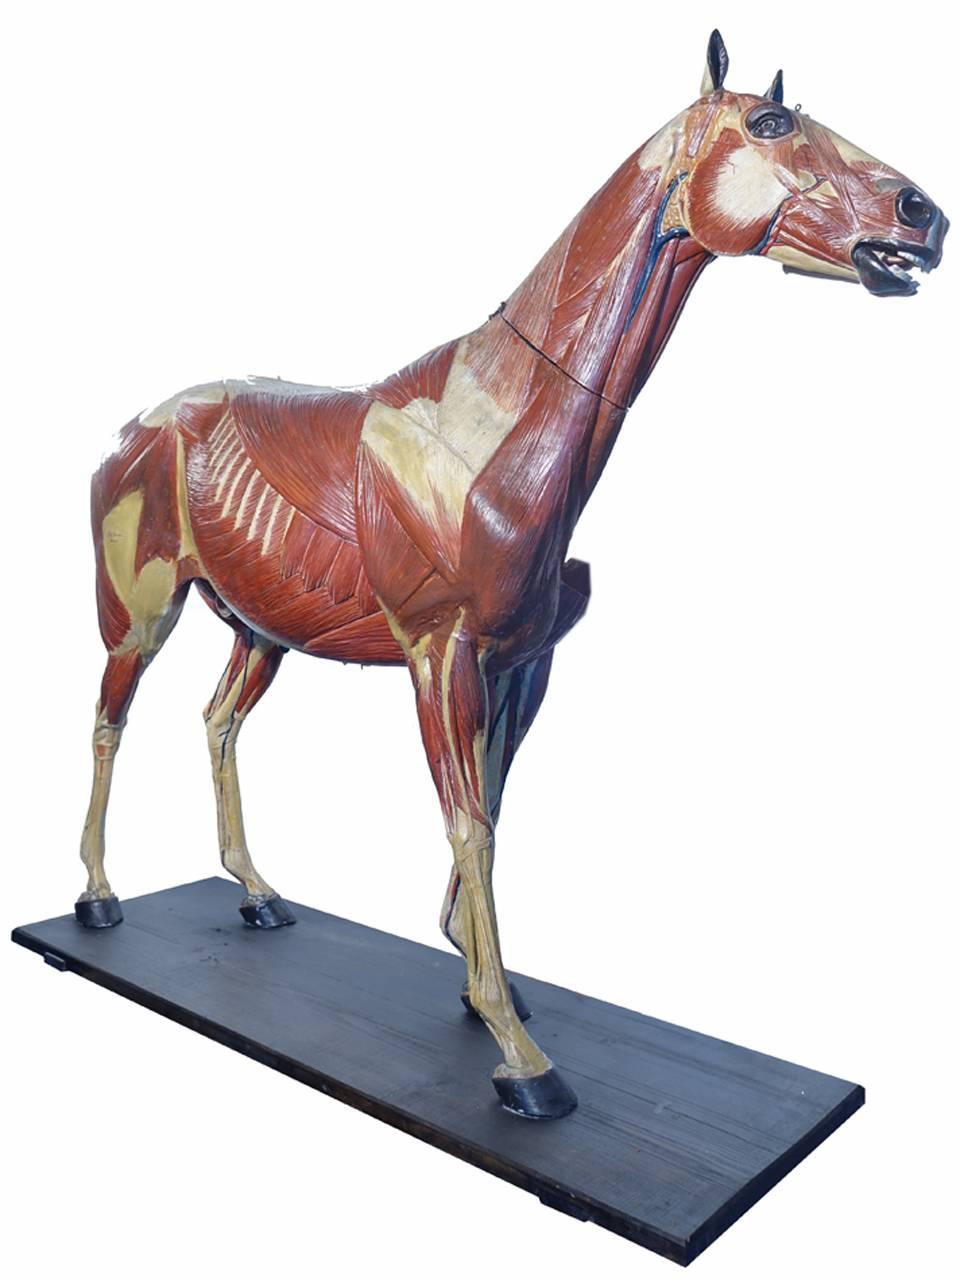 19th Century Rare German 1800s Anatomical Horse Model, Signed A.M.Sommer